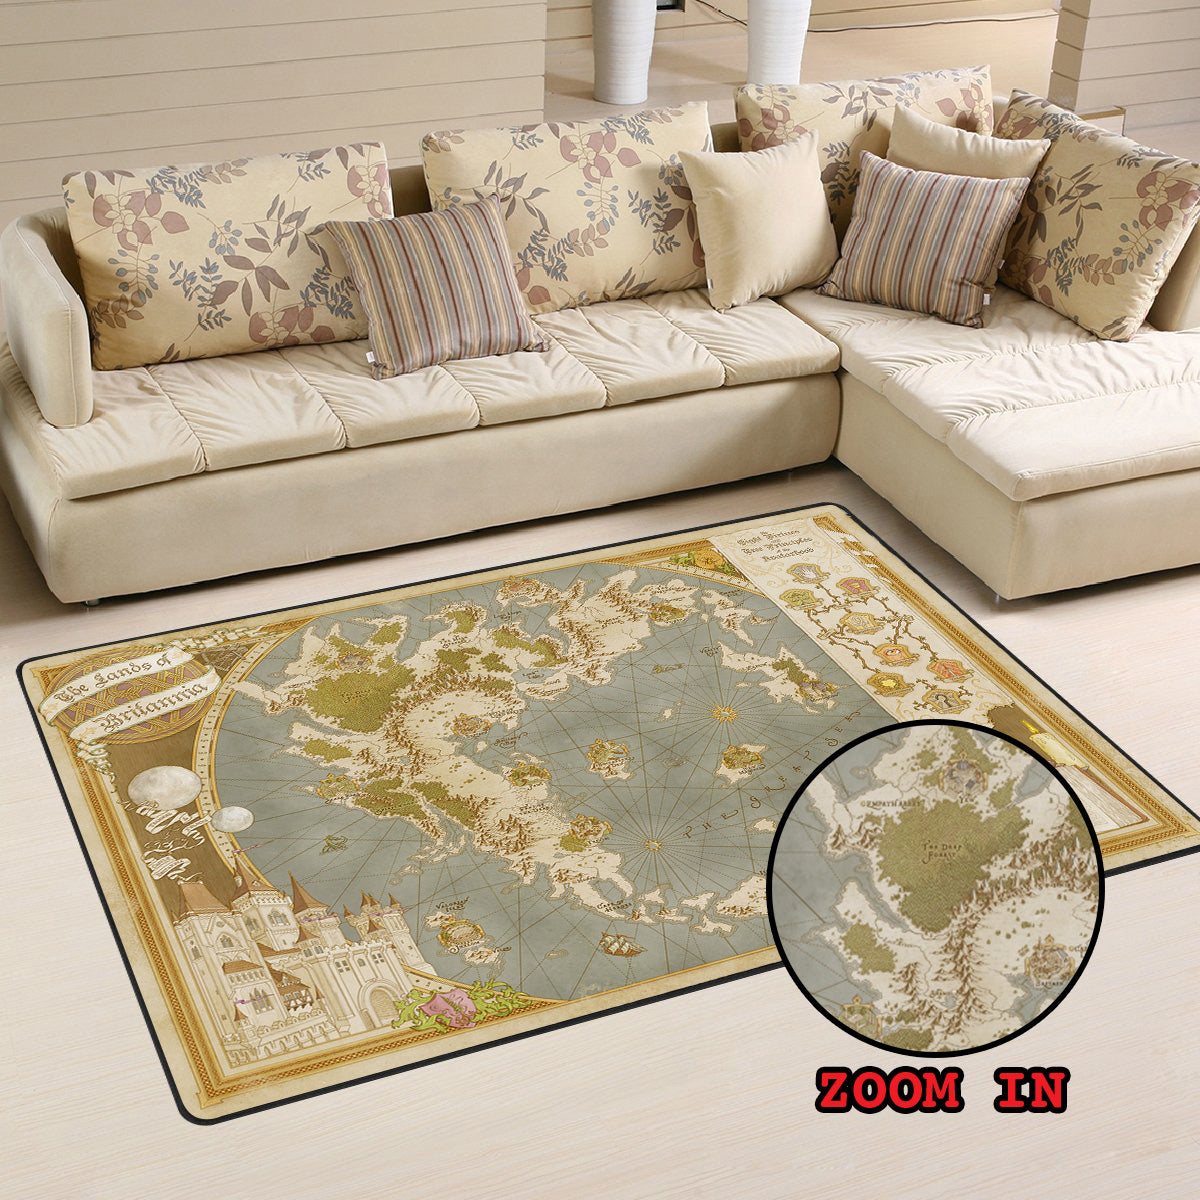 Dragon Area Rug Lands of Britannia from Ultima IV - 04769